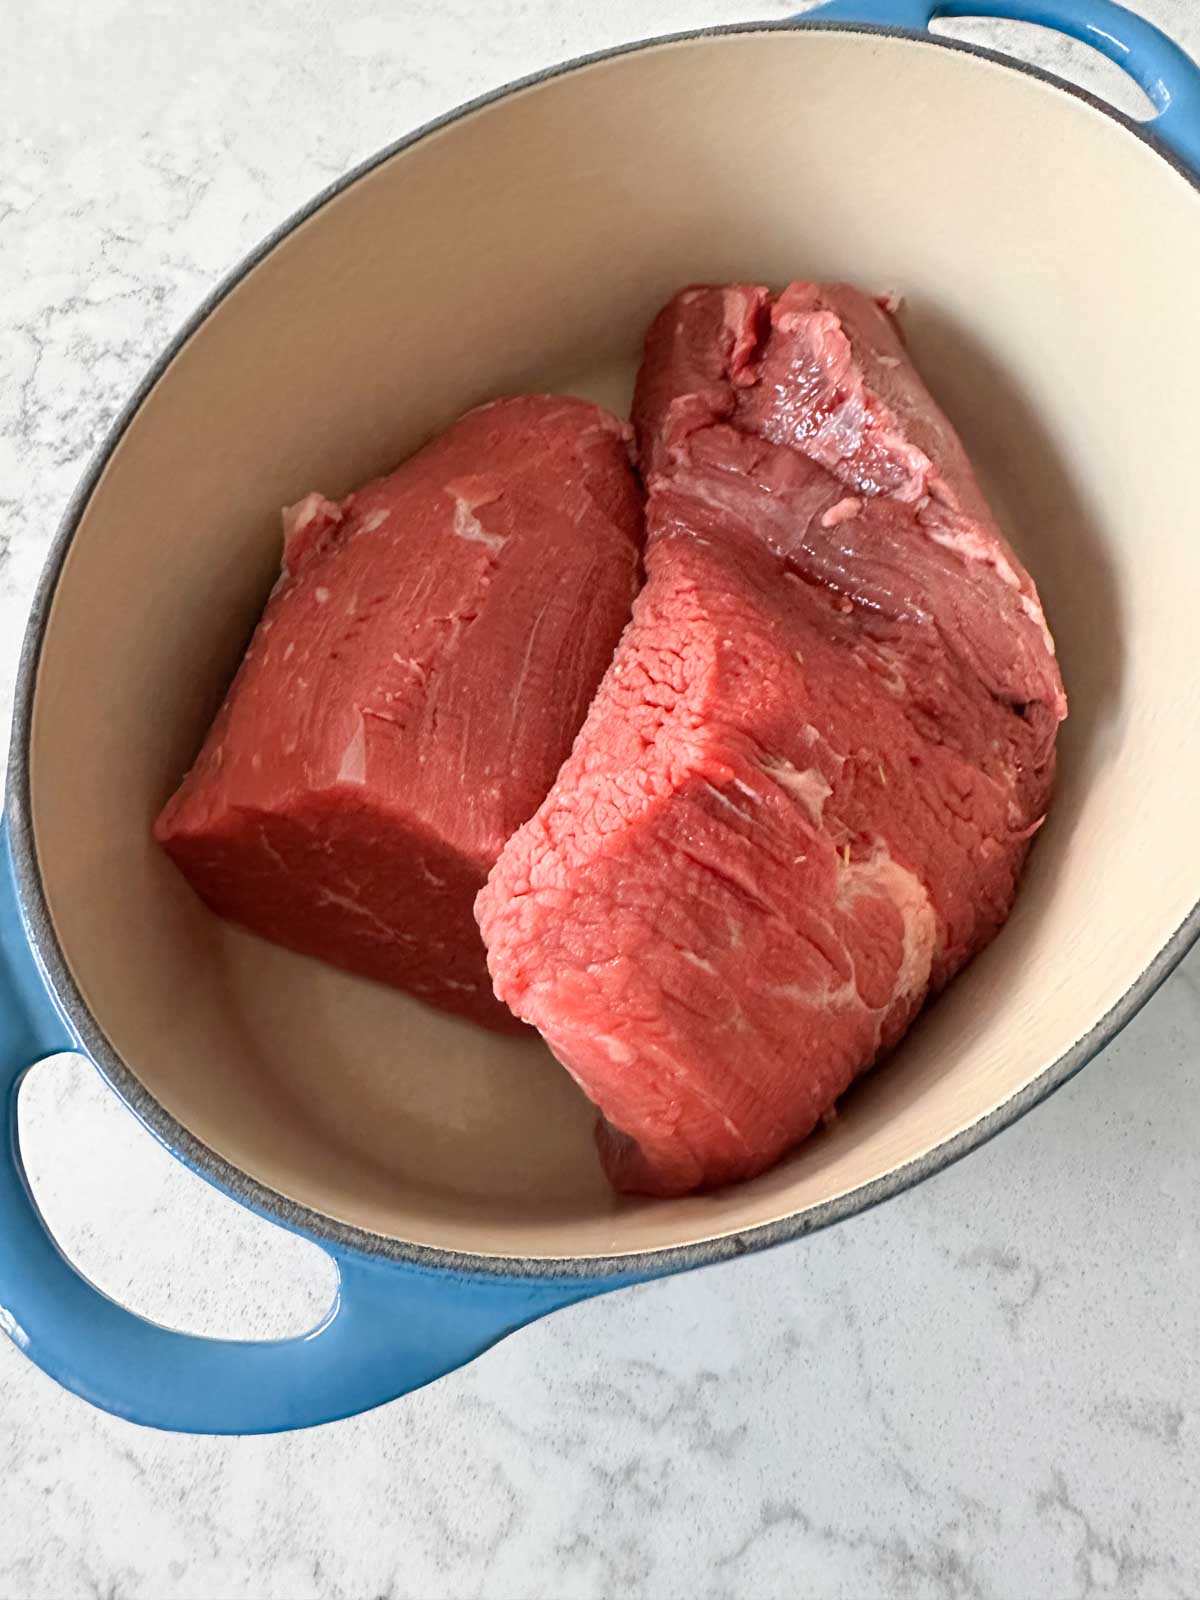 The beef is inside a smaller pot so it will marinate better.